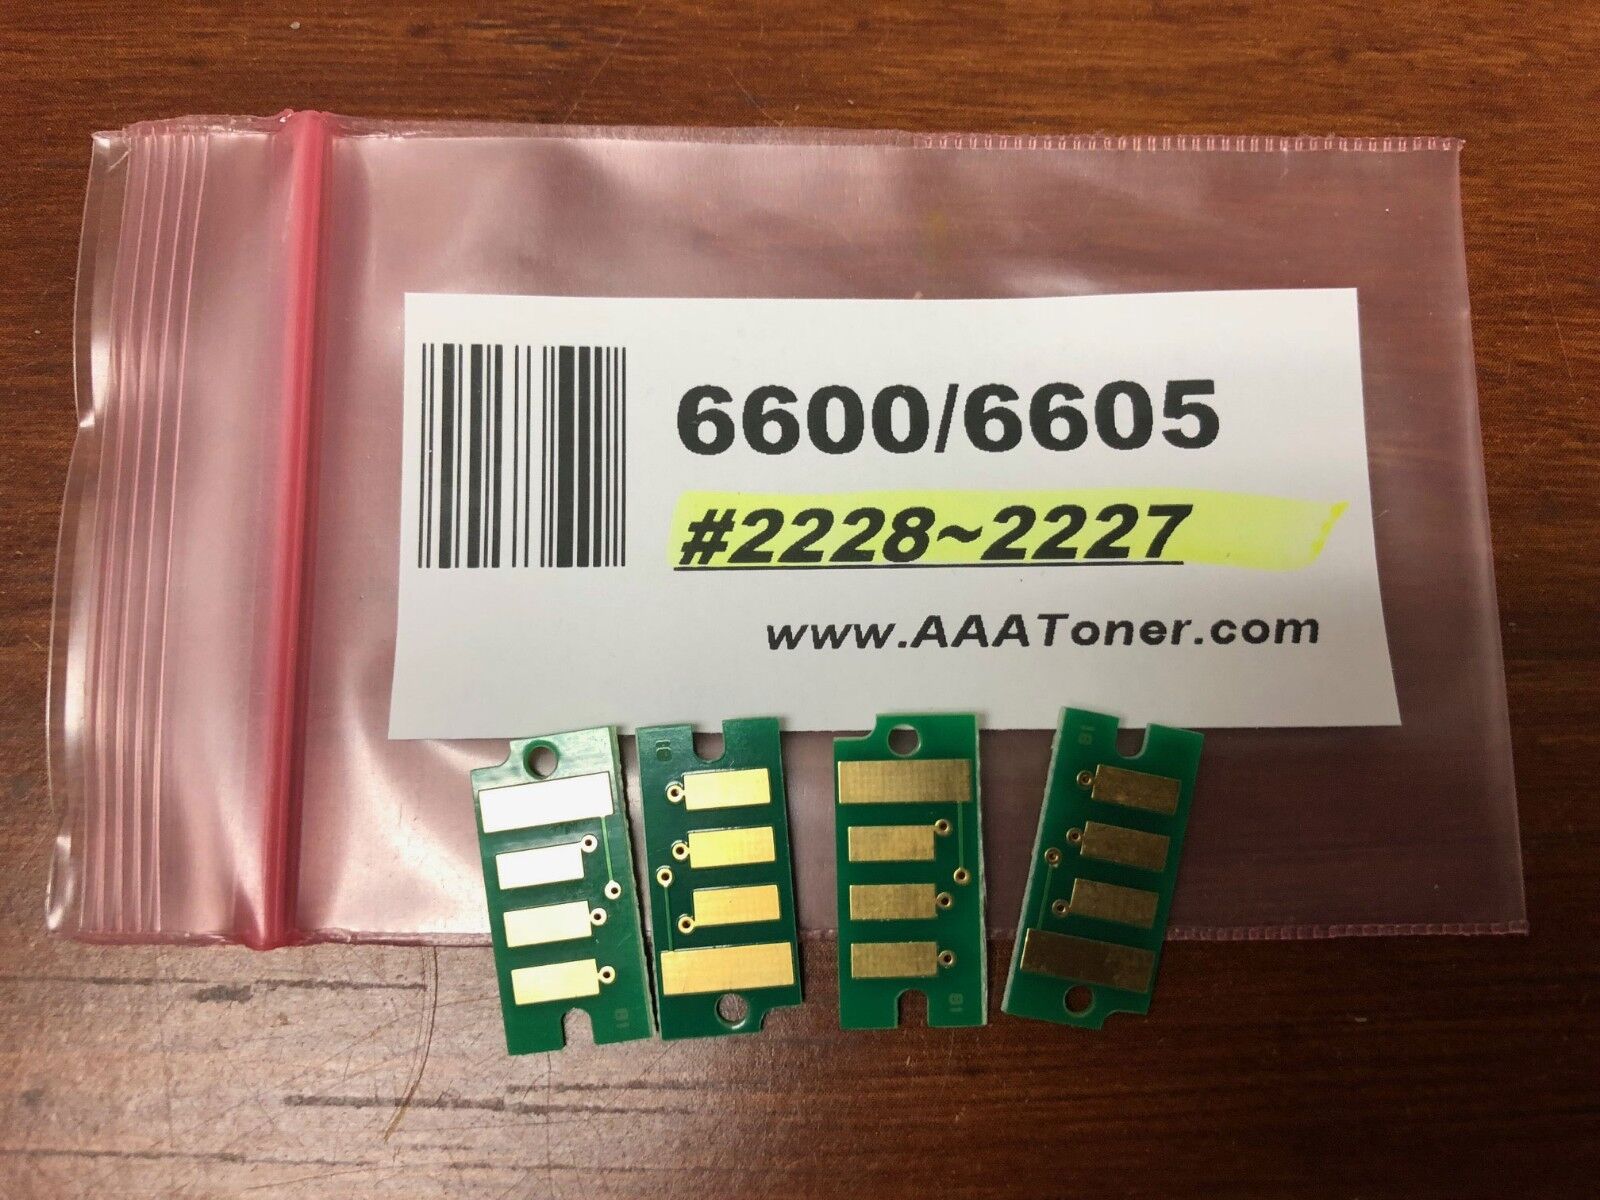 4 x Toner Chip (2228 - 2227) for Xerox Phaser 6600, WorkCentre 6605 Refill